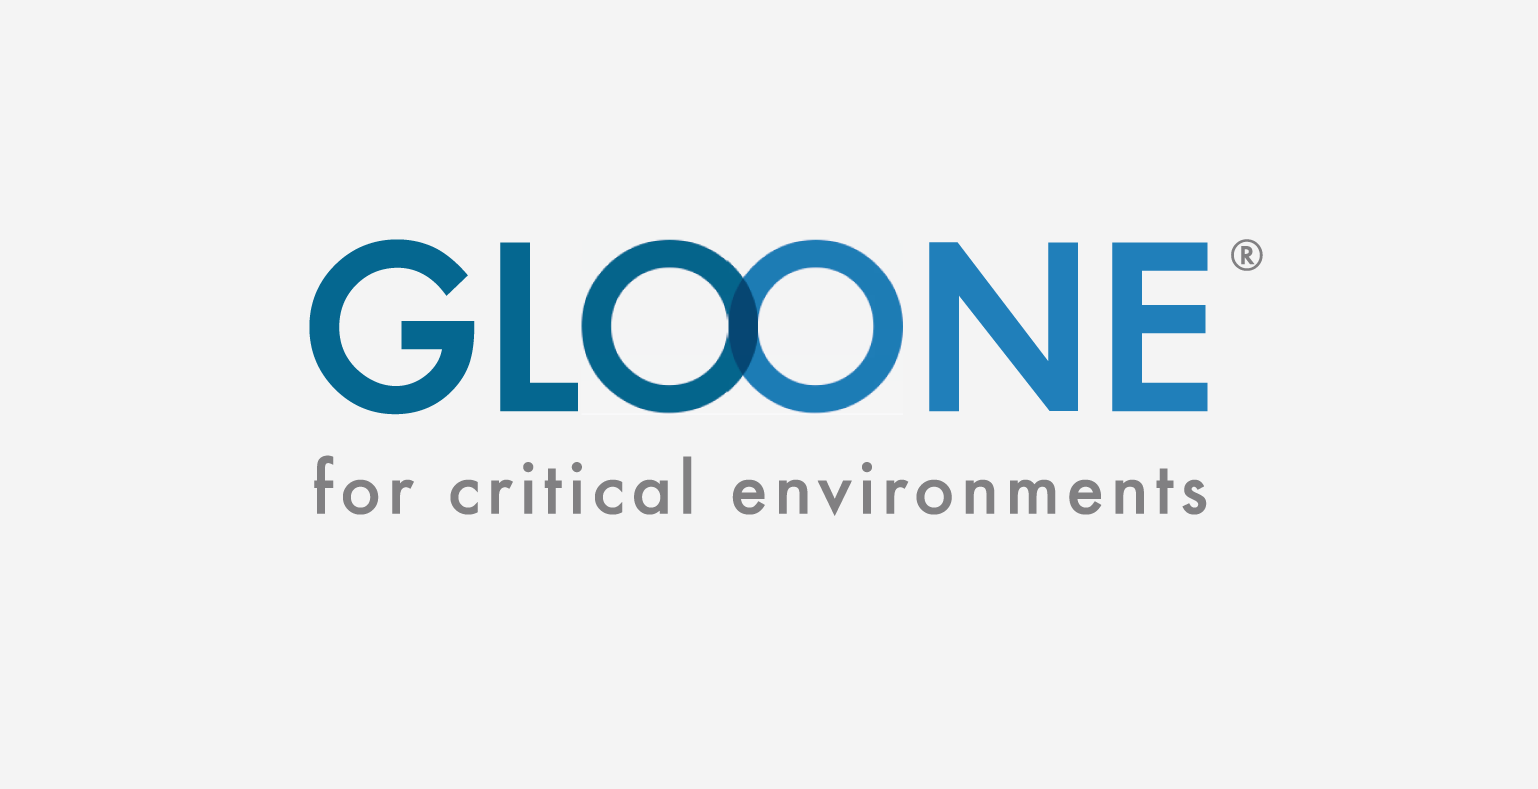 GLOONE is born – for critical environments